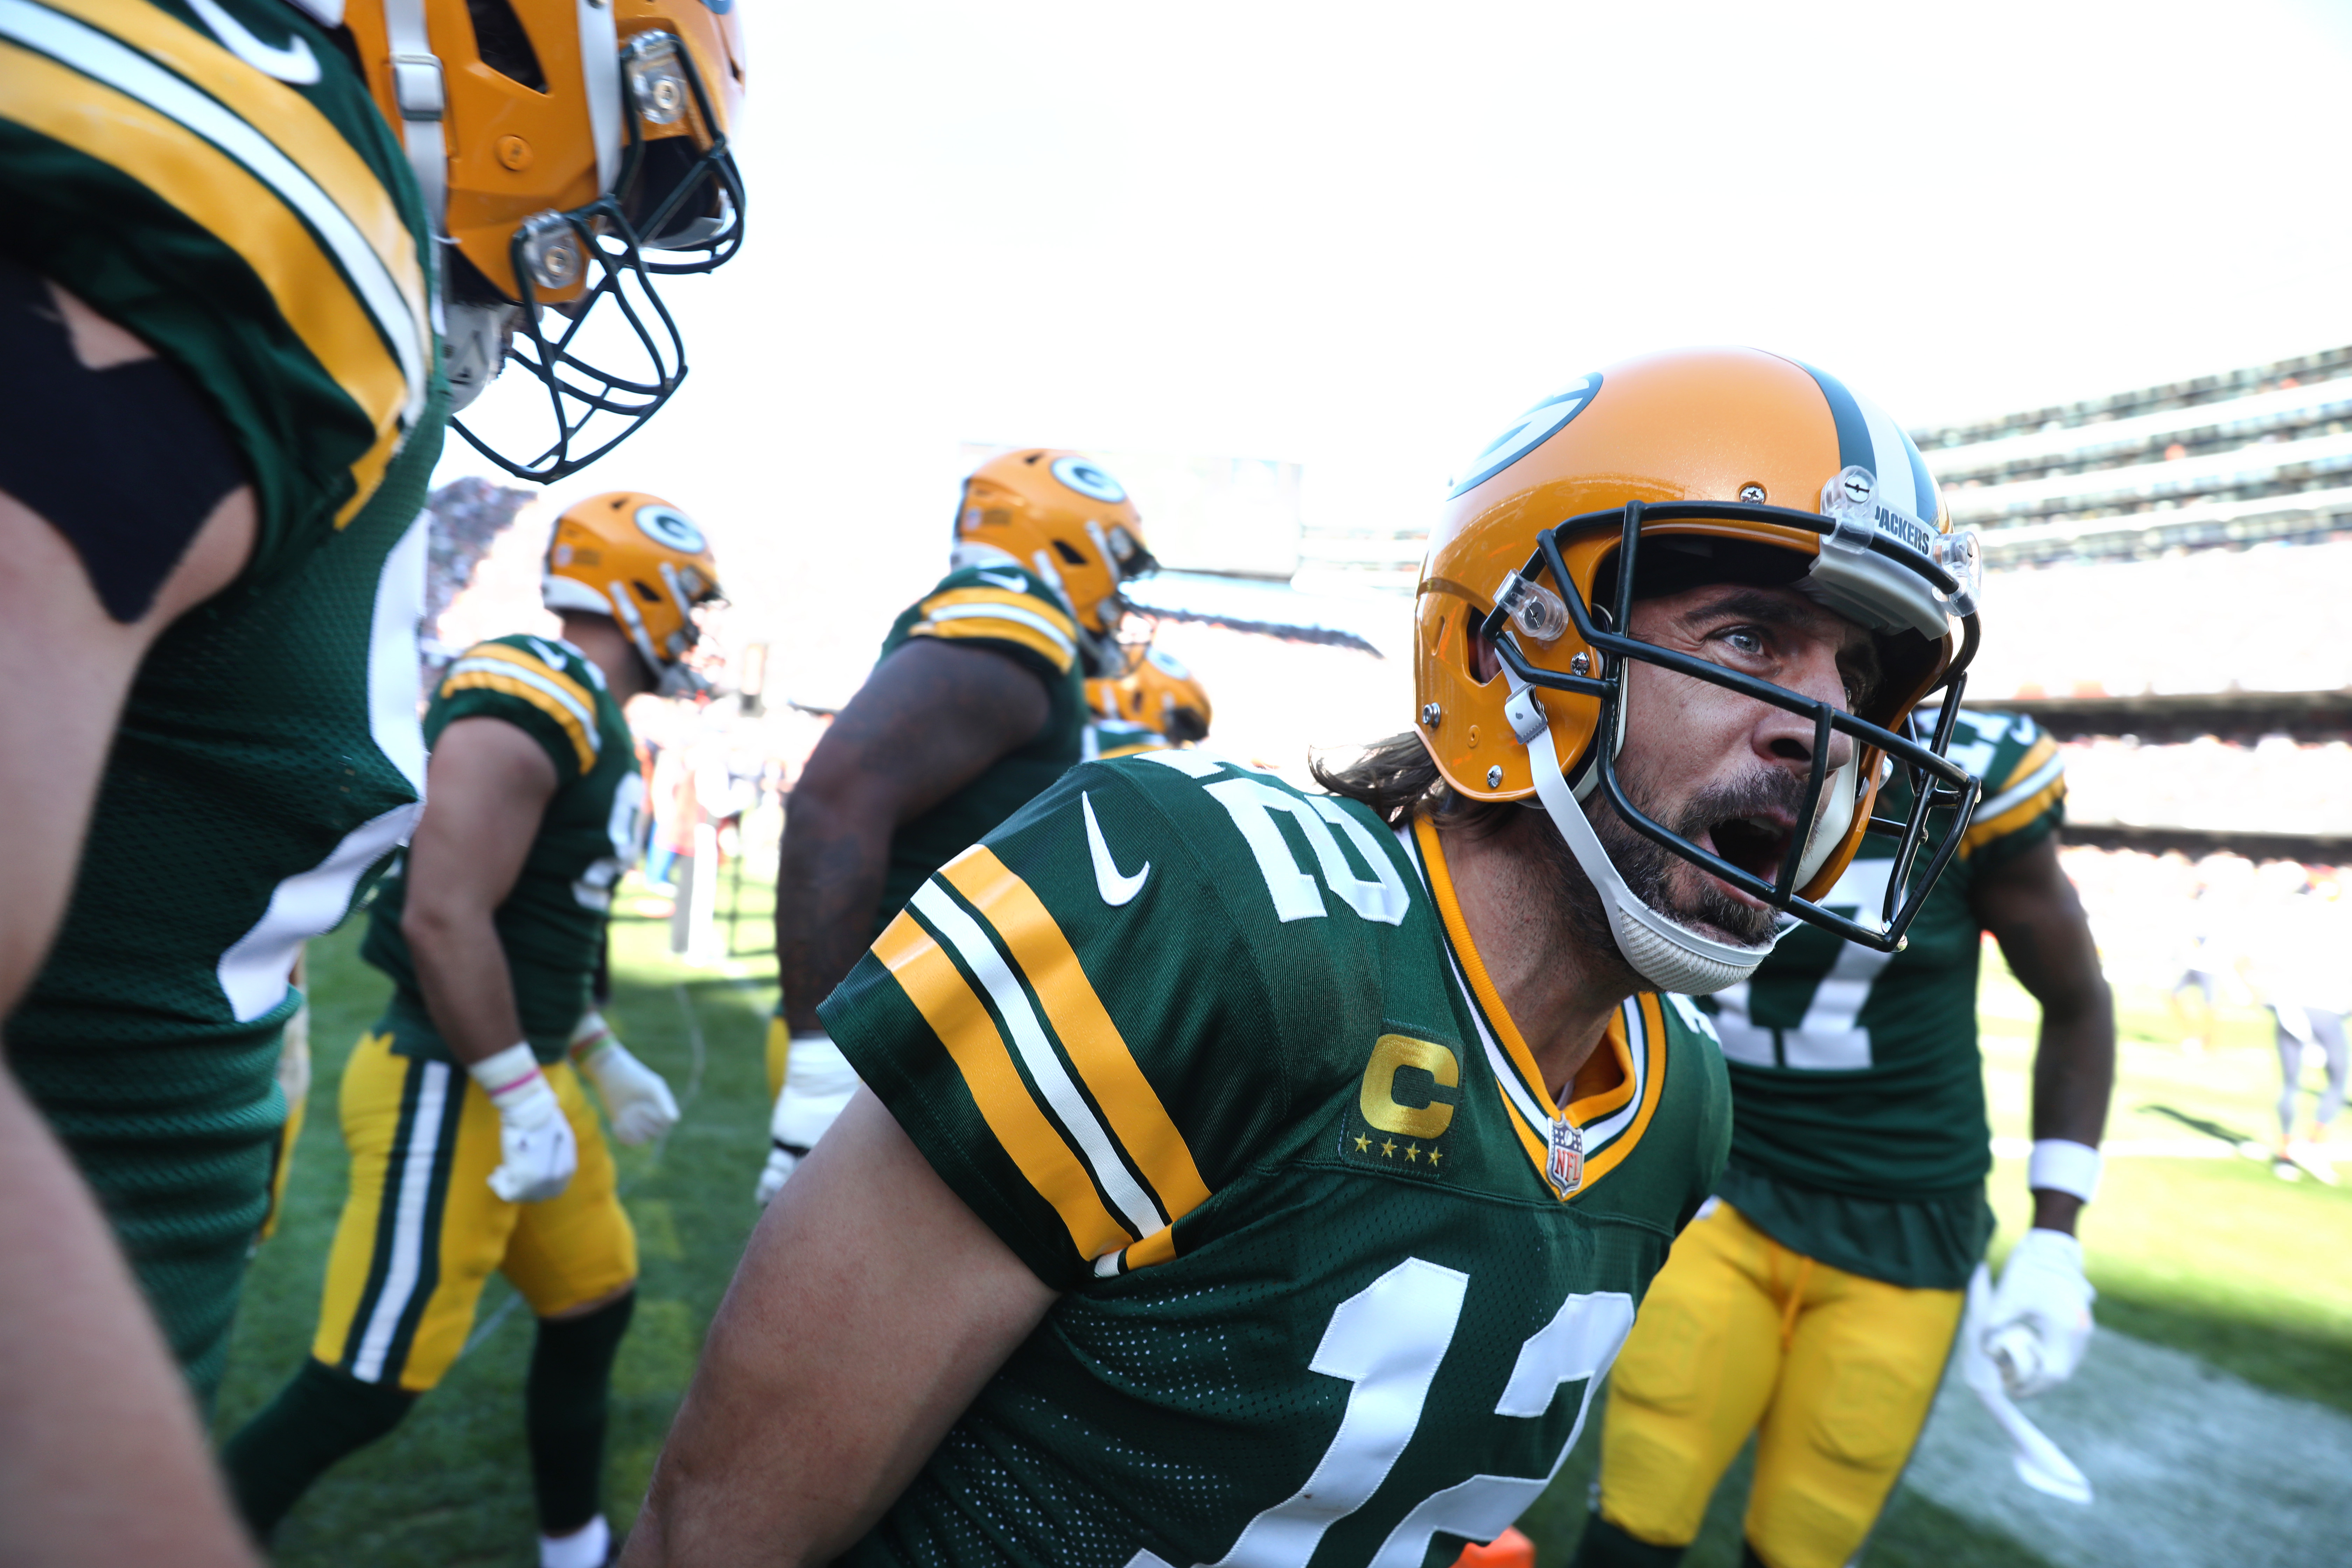 Are Chicago Bears still rankled by Aaron Rodgers' taunt?